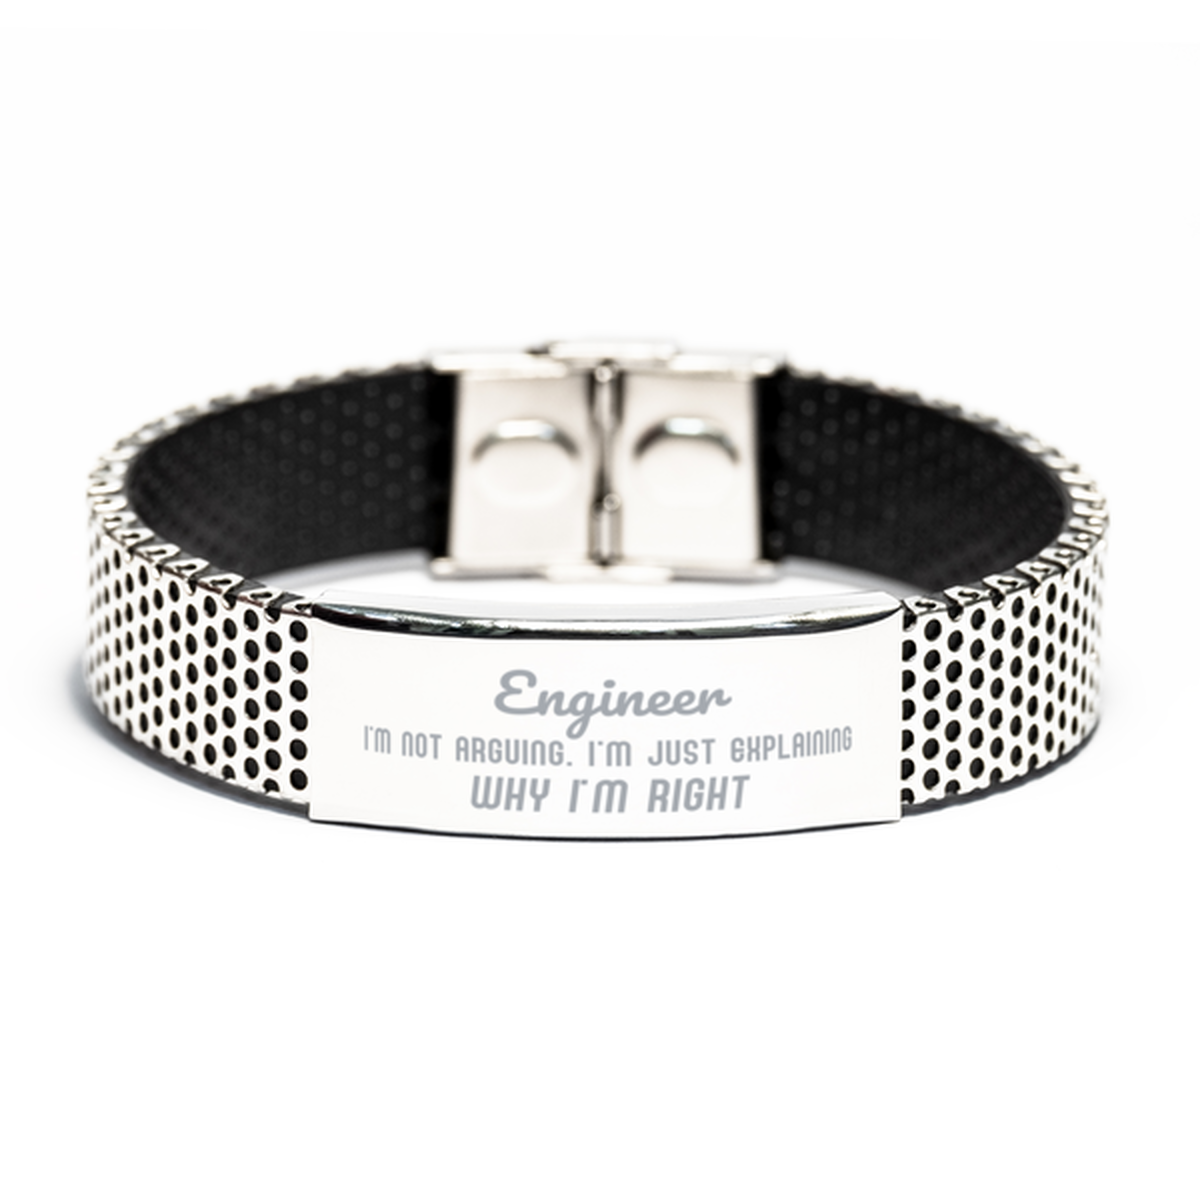 Engineer I'm not Arguing. I'm Just Explaining Why I'm RIGHT Stainless Steel Bracelet, Funny Saying Quote Engineer Gifts For Engineer Graduation Birthday Christmas Gifts for Men Women Coworker